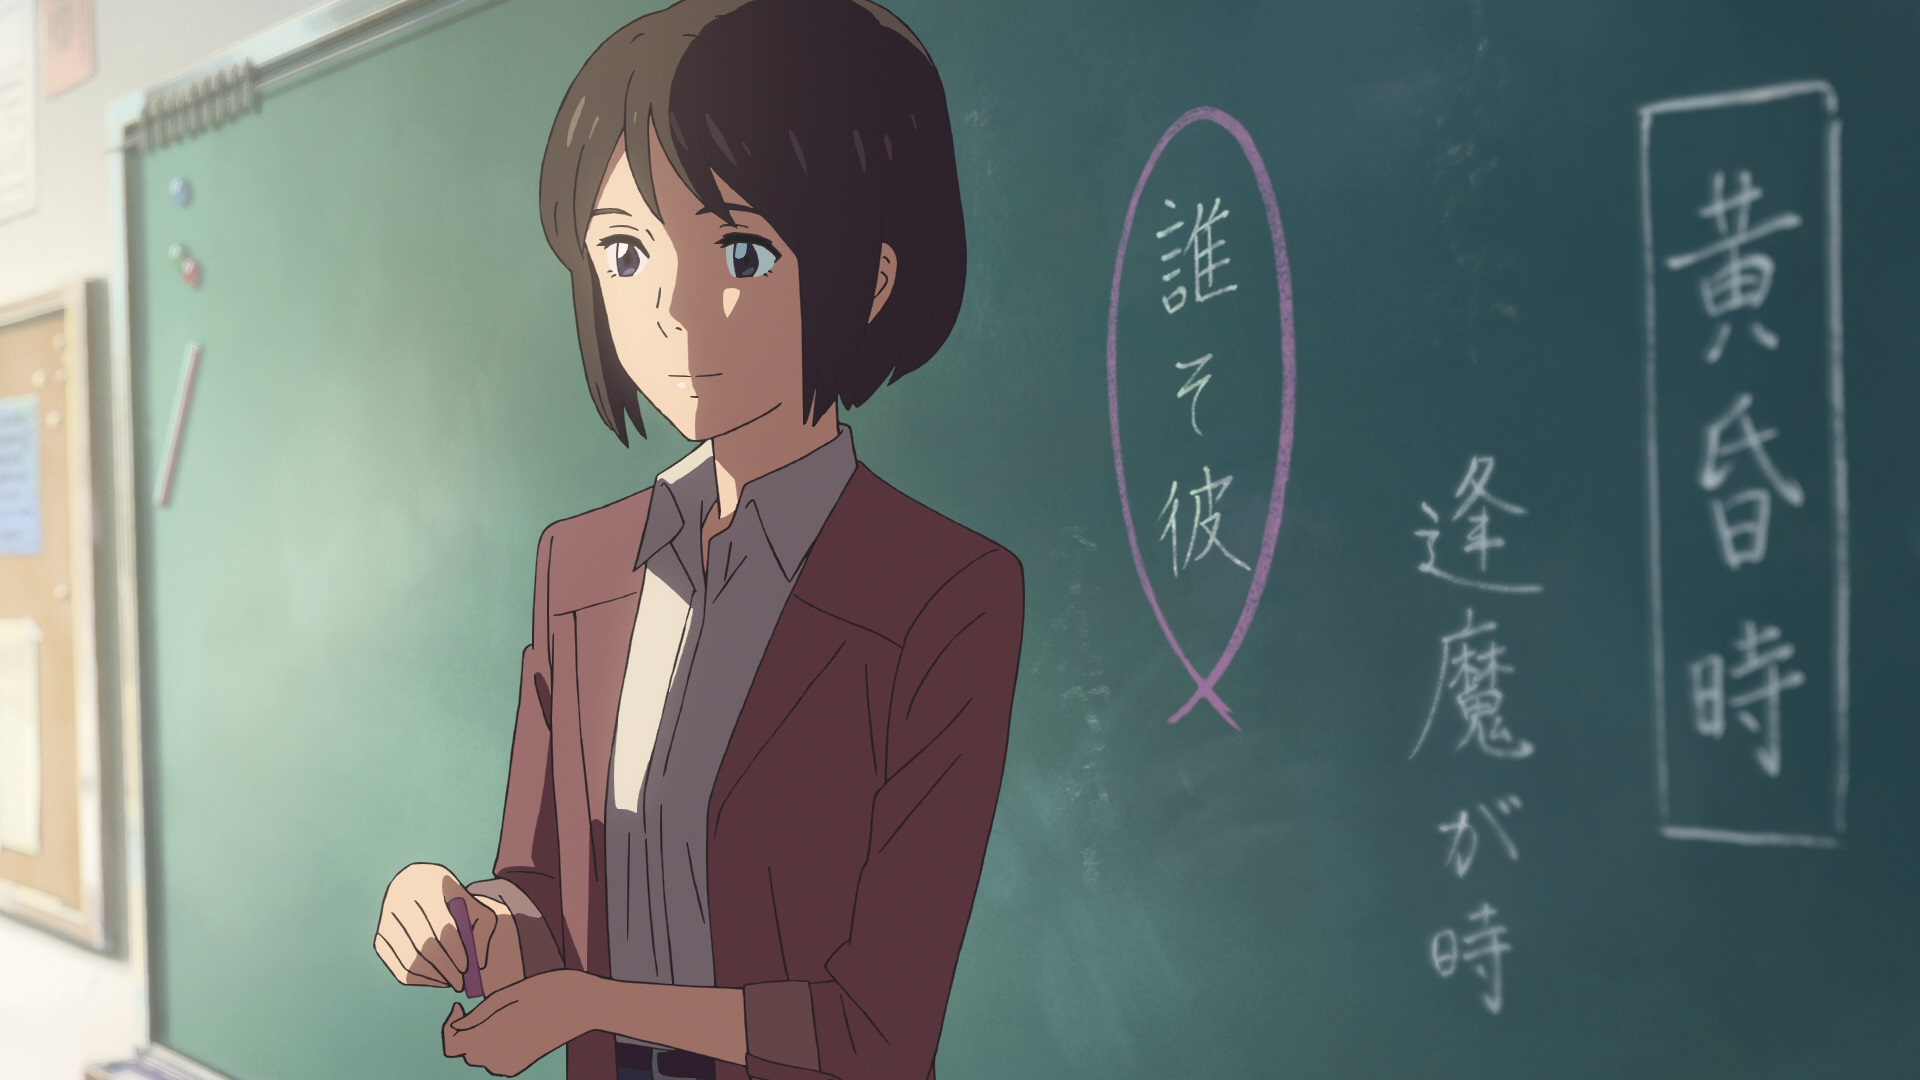 Will the anime movie Your Name (Kimi no Na wa) get a sequel? - Quora